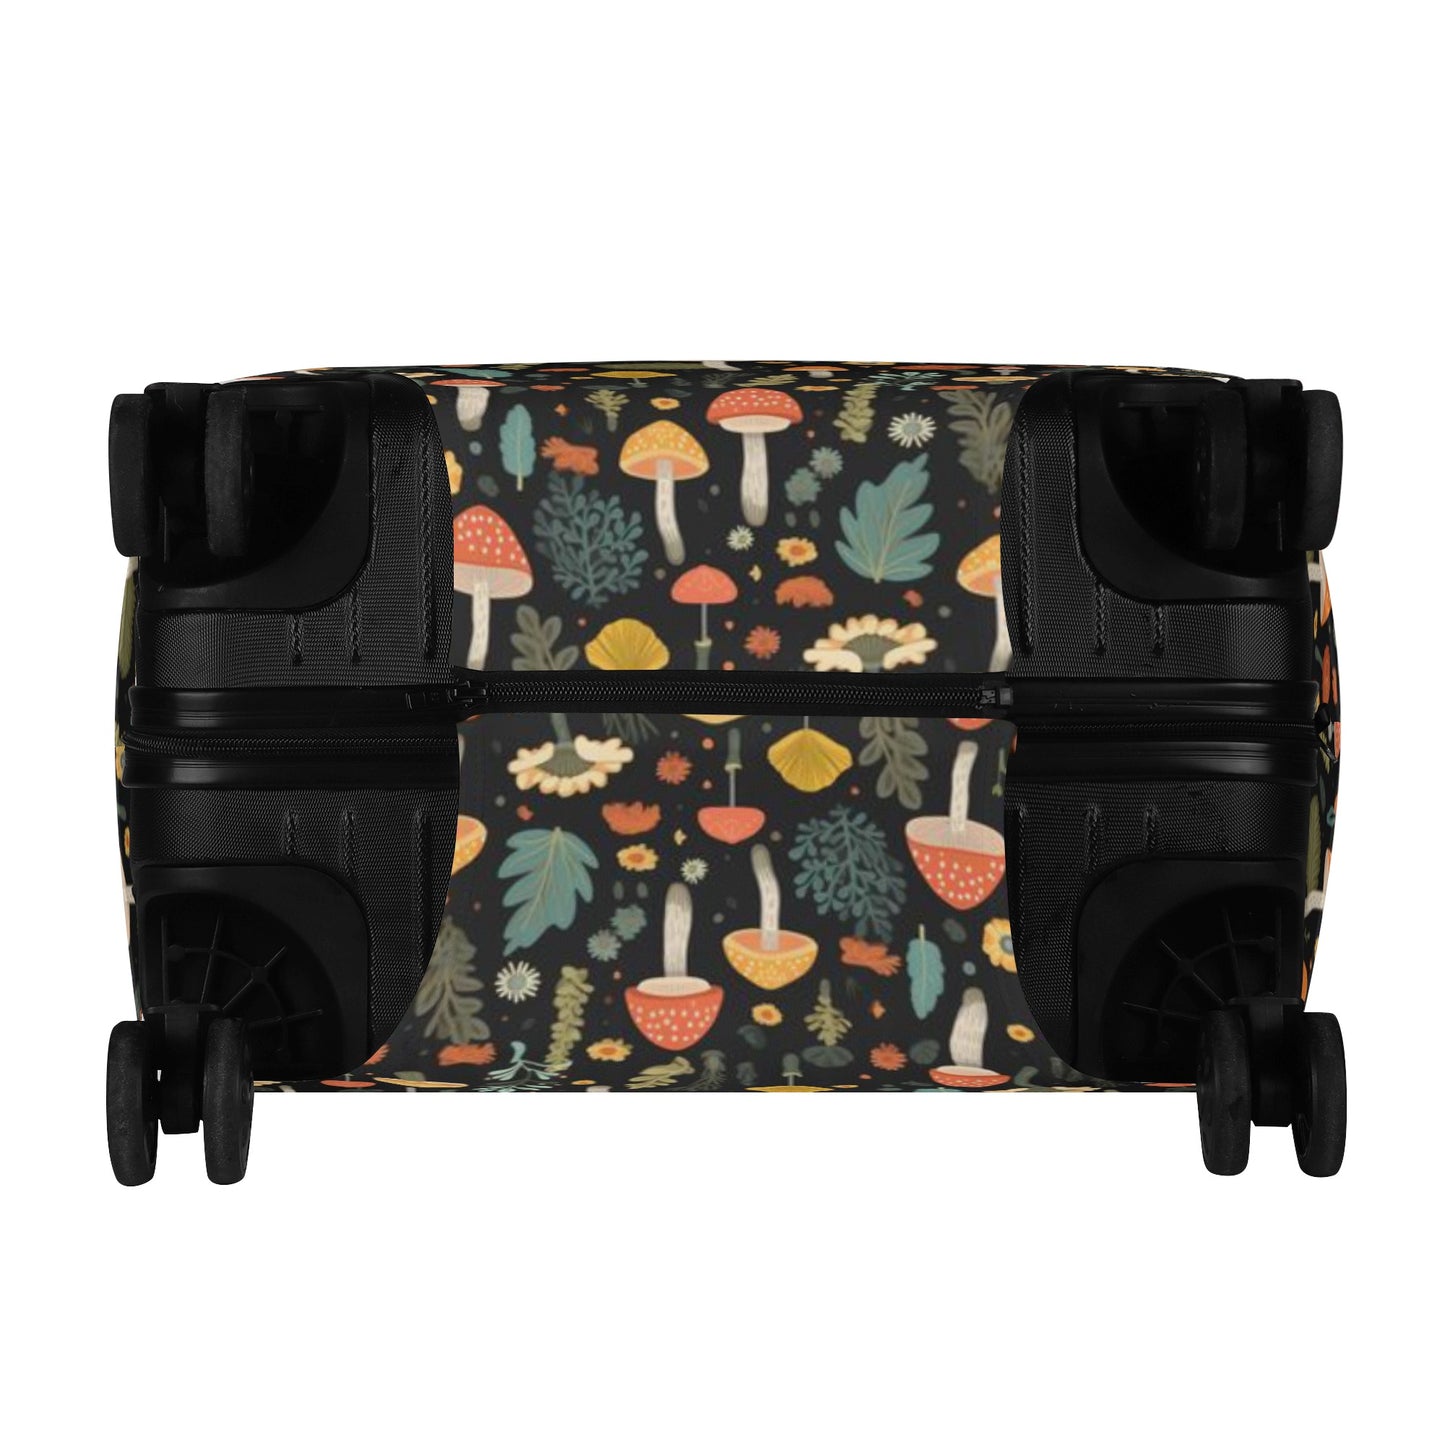 Mushroom Luggage Cover, Floral Cottagecore Suitcase Protector Hard Carry On Bag Washable Wrap Large Small Travel Aesthetic Sleeve